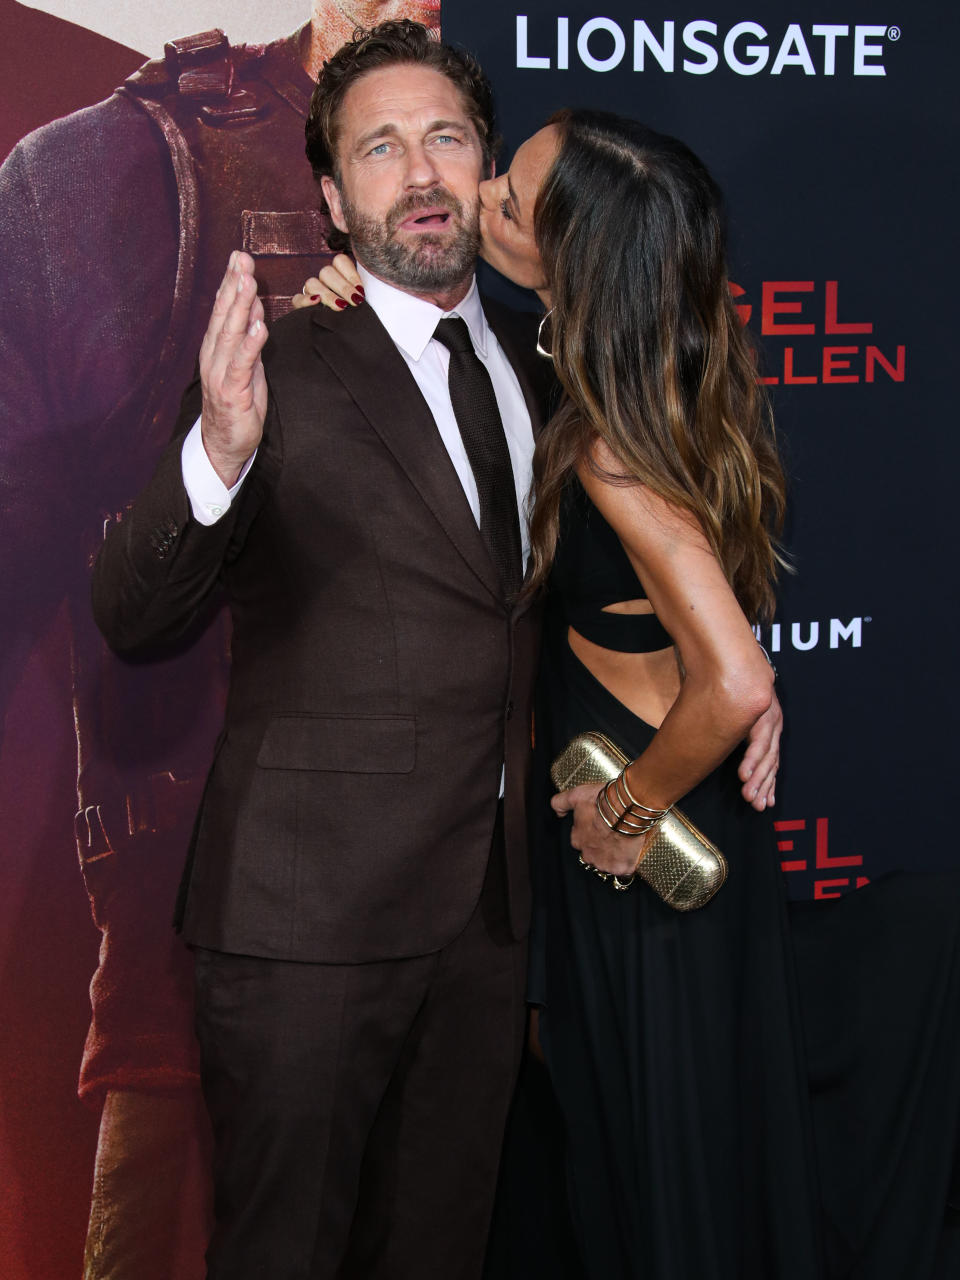 WESTWOOD, LOS ANGELES, CALIFORNIA, USA - AUGUST 20: Actor Gerard Butler and girlfriend Morgan Brown arrive at the Los Angeles Premiere Of Lionsgate's 'Angel Has Fallen' held at the Regency Village Theatre on August 20, 2019 in Westwood, Los Angeles, California, United States. (Photo by Xavier Collin/Image Press Agency/Sipa USA)